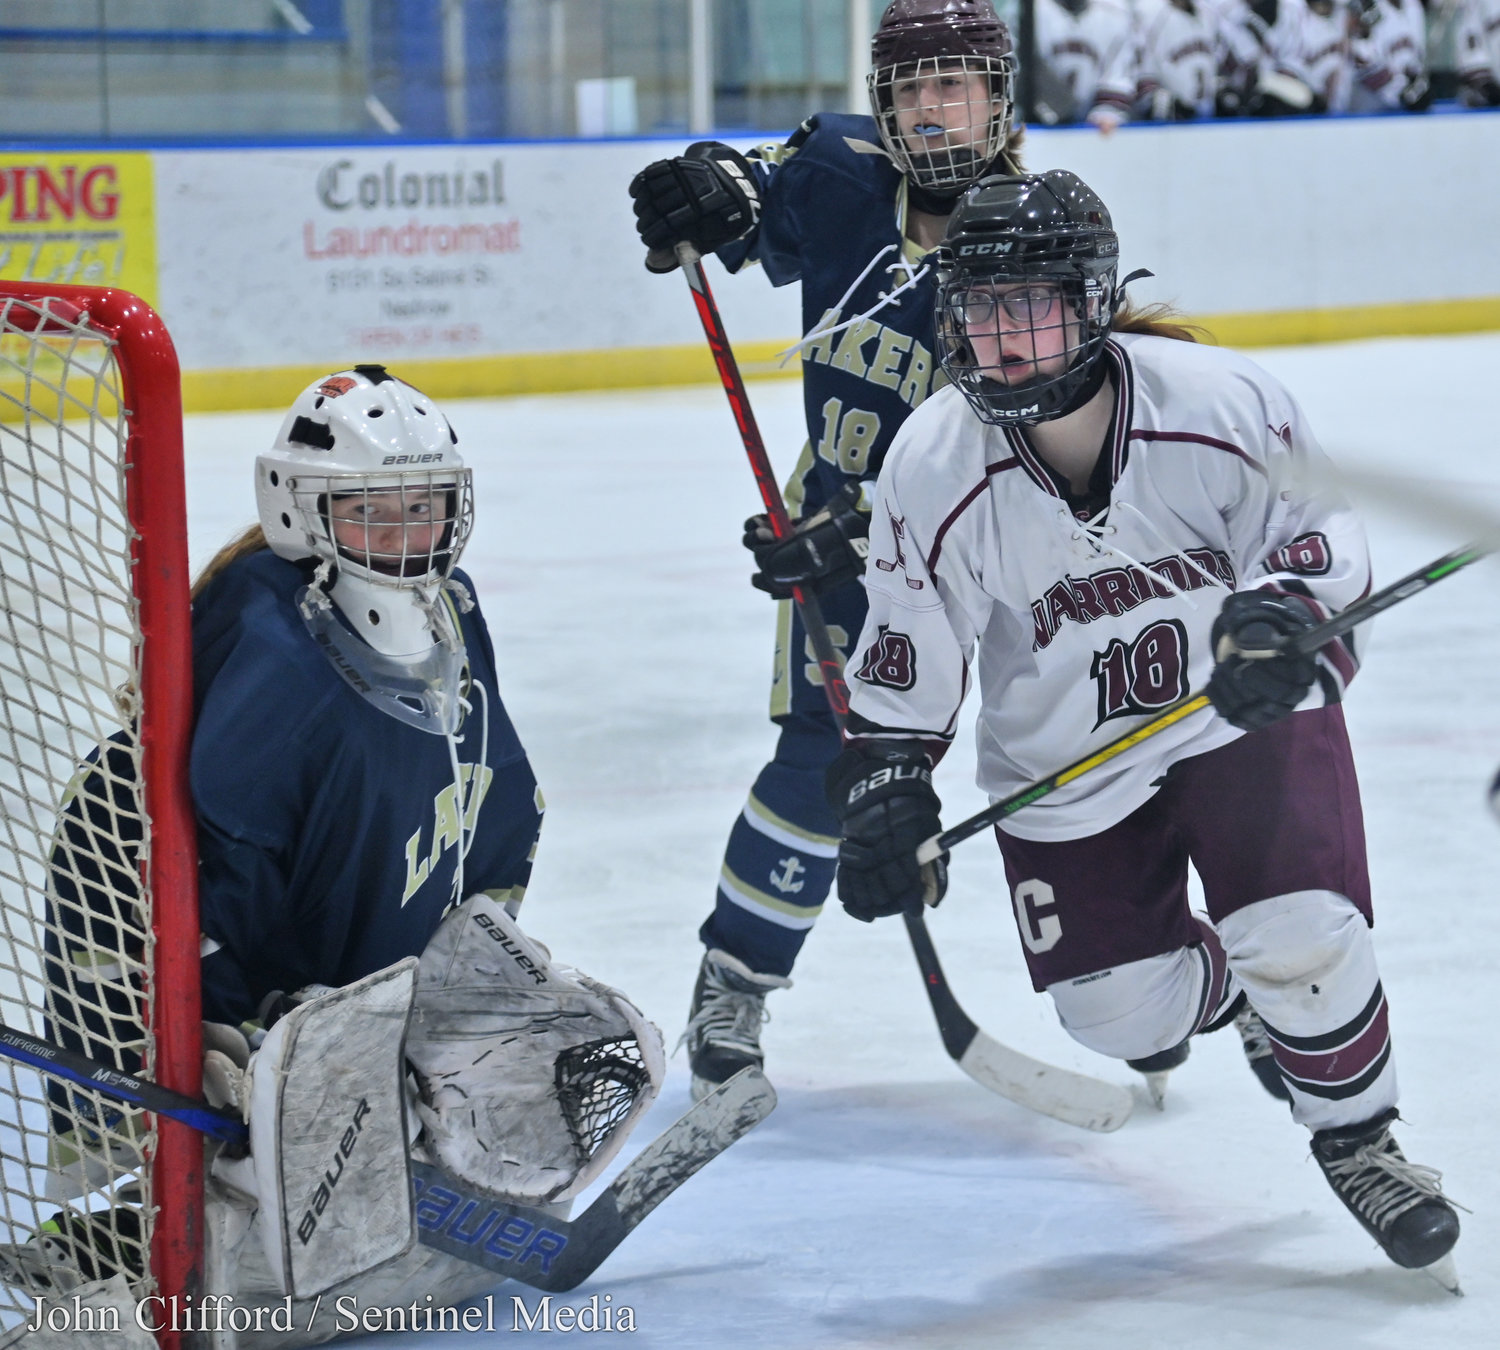 The Clinton Warriors in action against the Skaneateles Lakers in the Section III girls ice hockey championship Wednesday night in Nedrow. Clinton beat Skaneateles 1-0 in overtime.